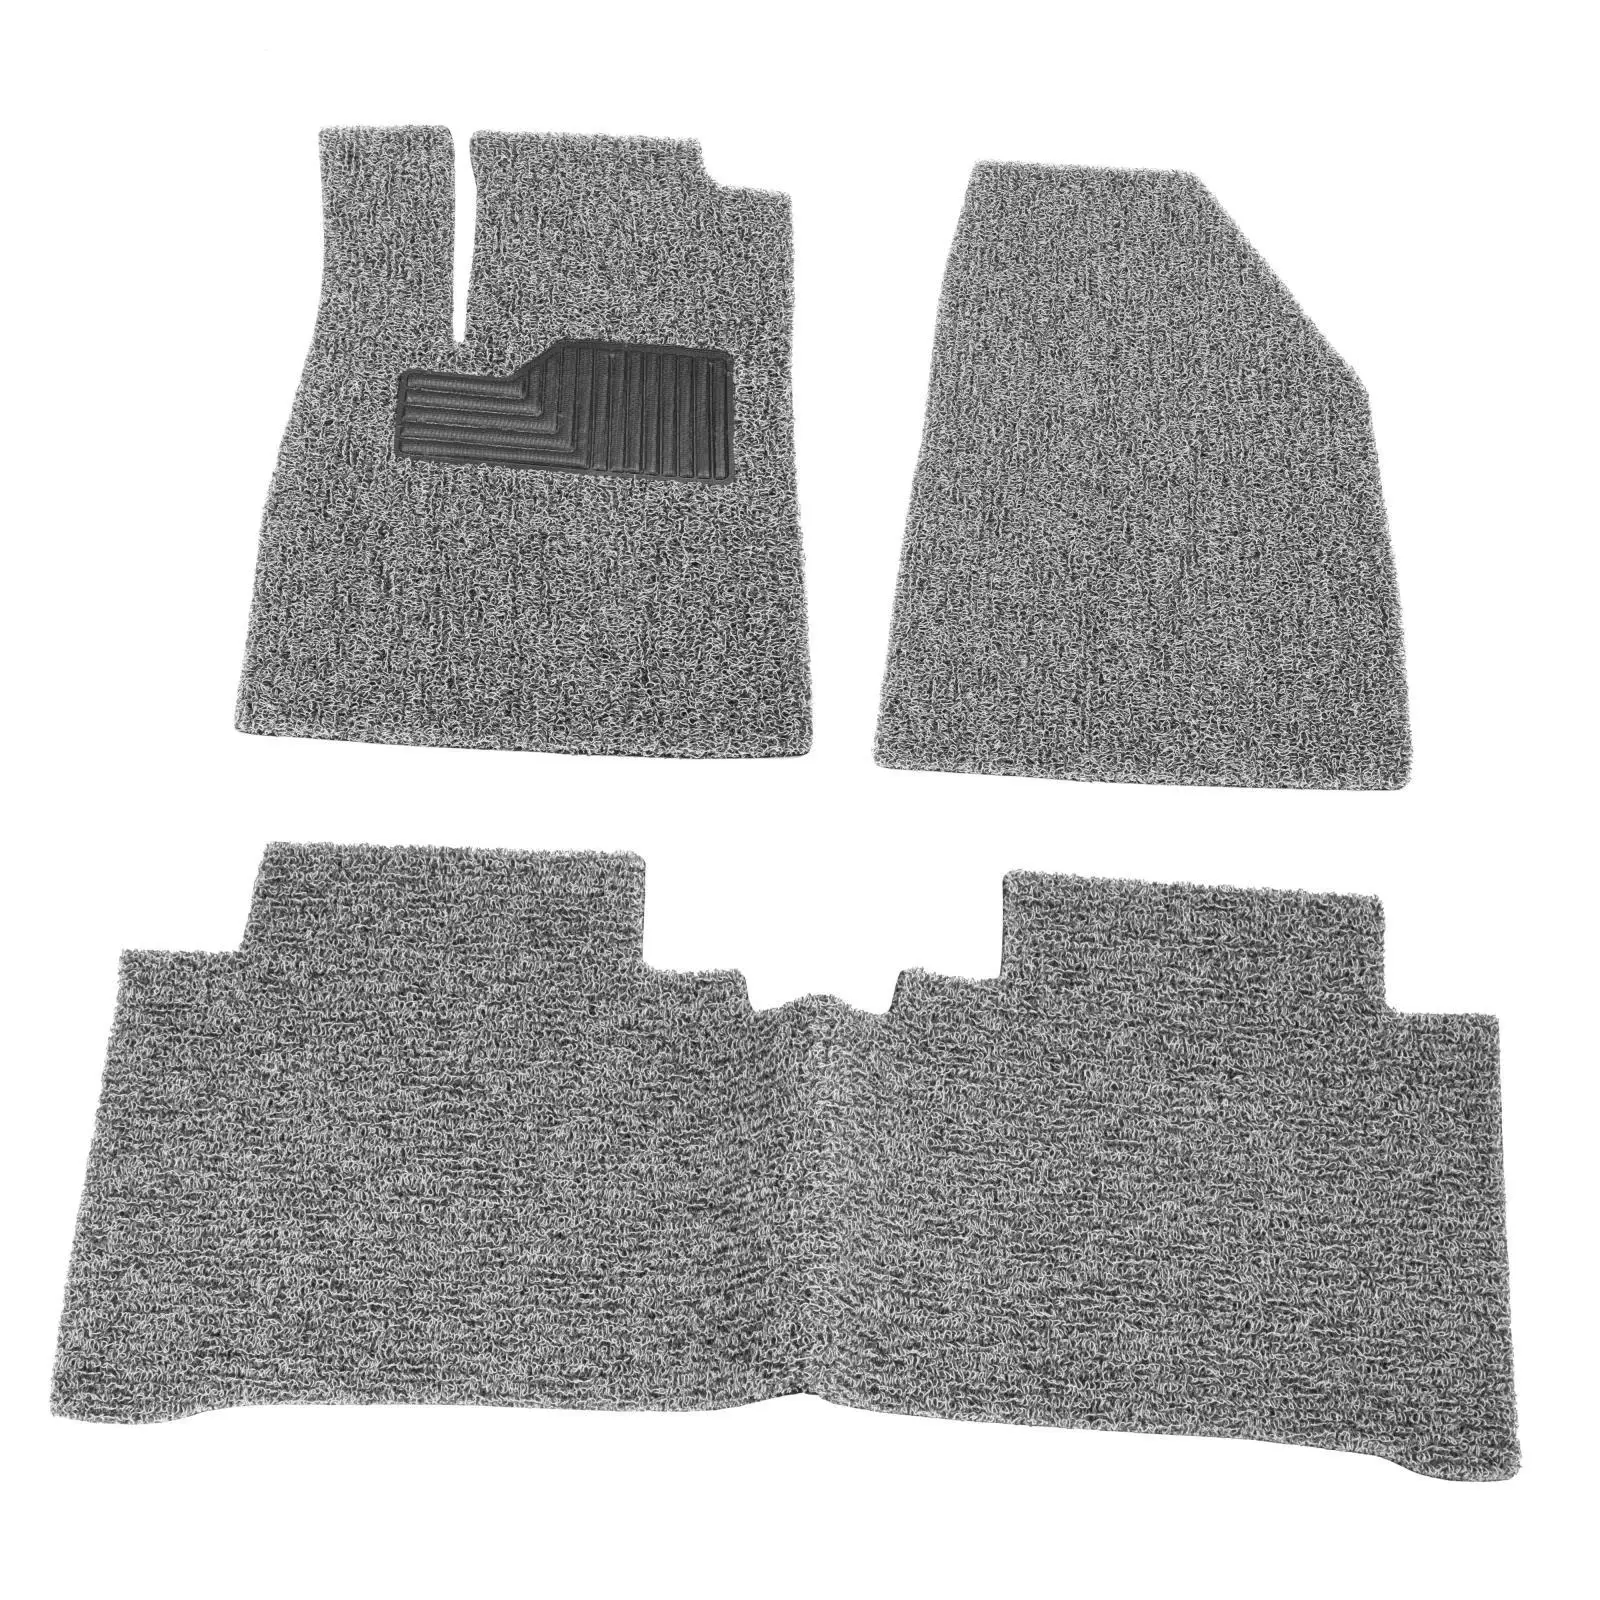 3x Automotive Floor Mats Protection PVC High Toughness Practical Convenient for Byd Yuan Plus Atto 3 21-23